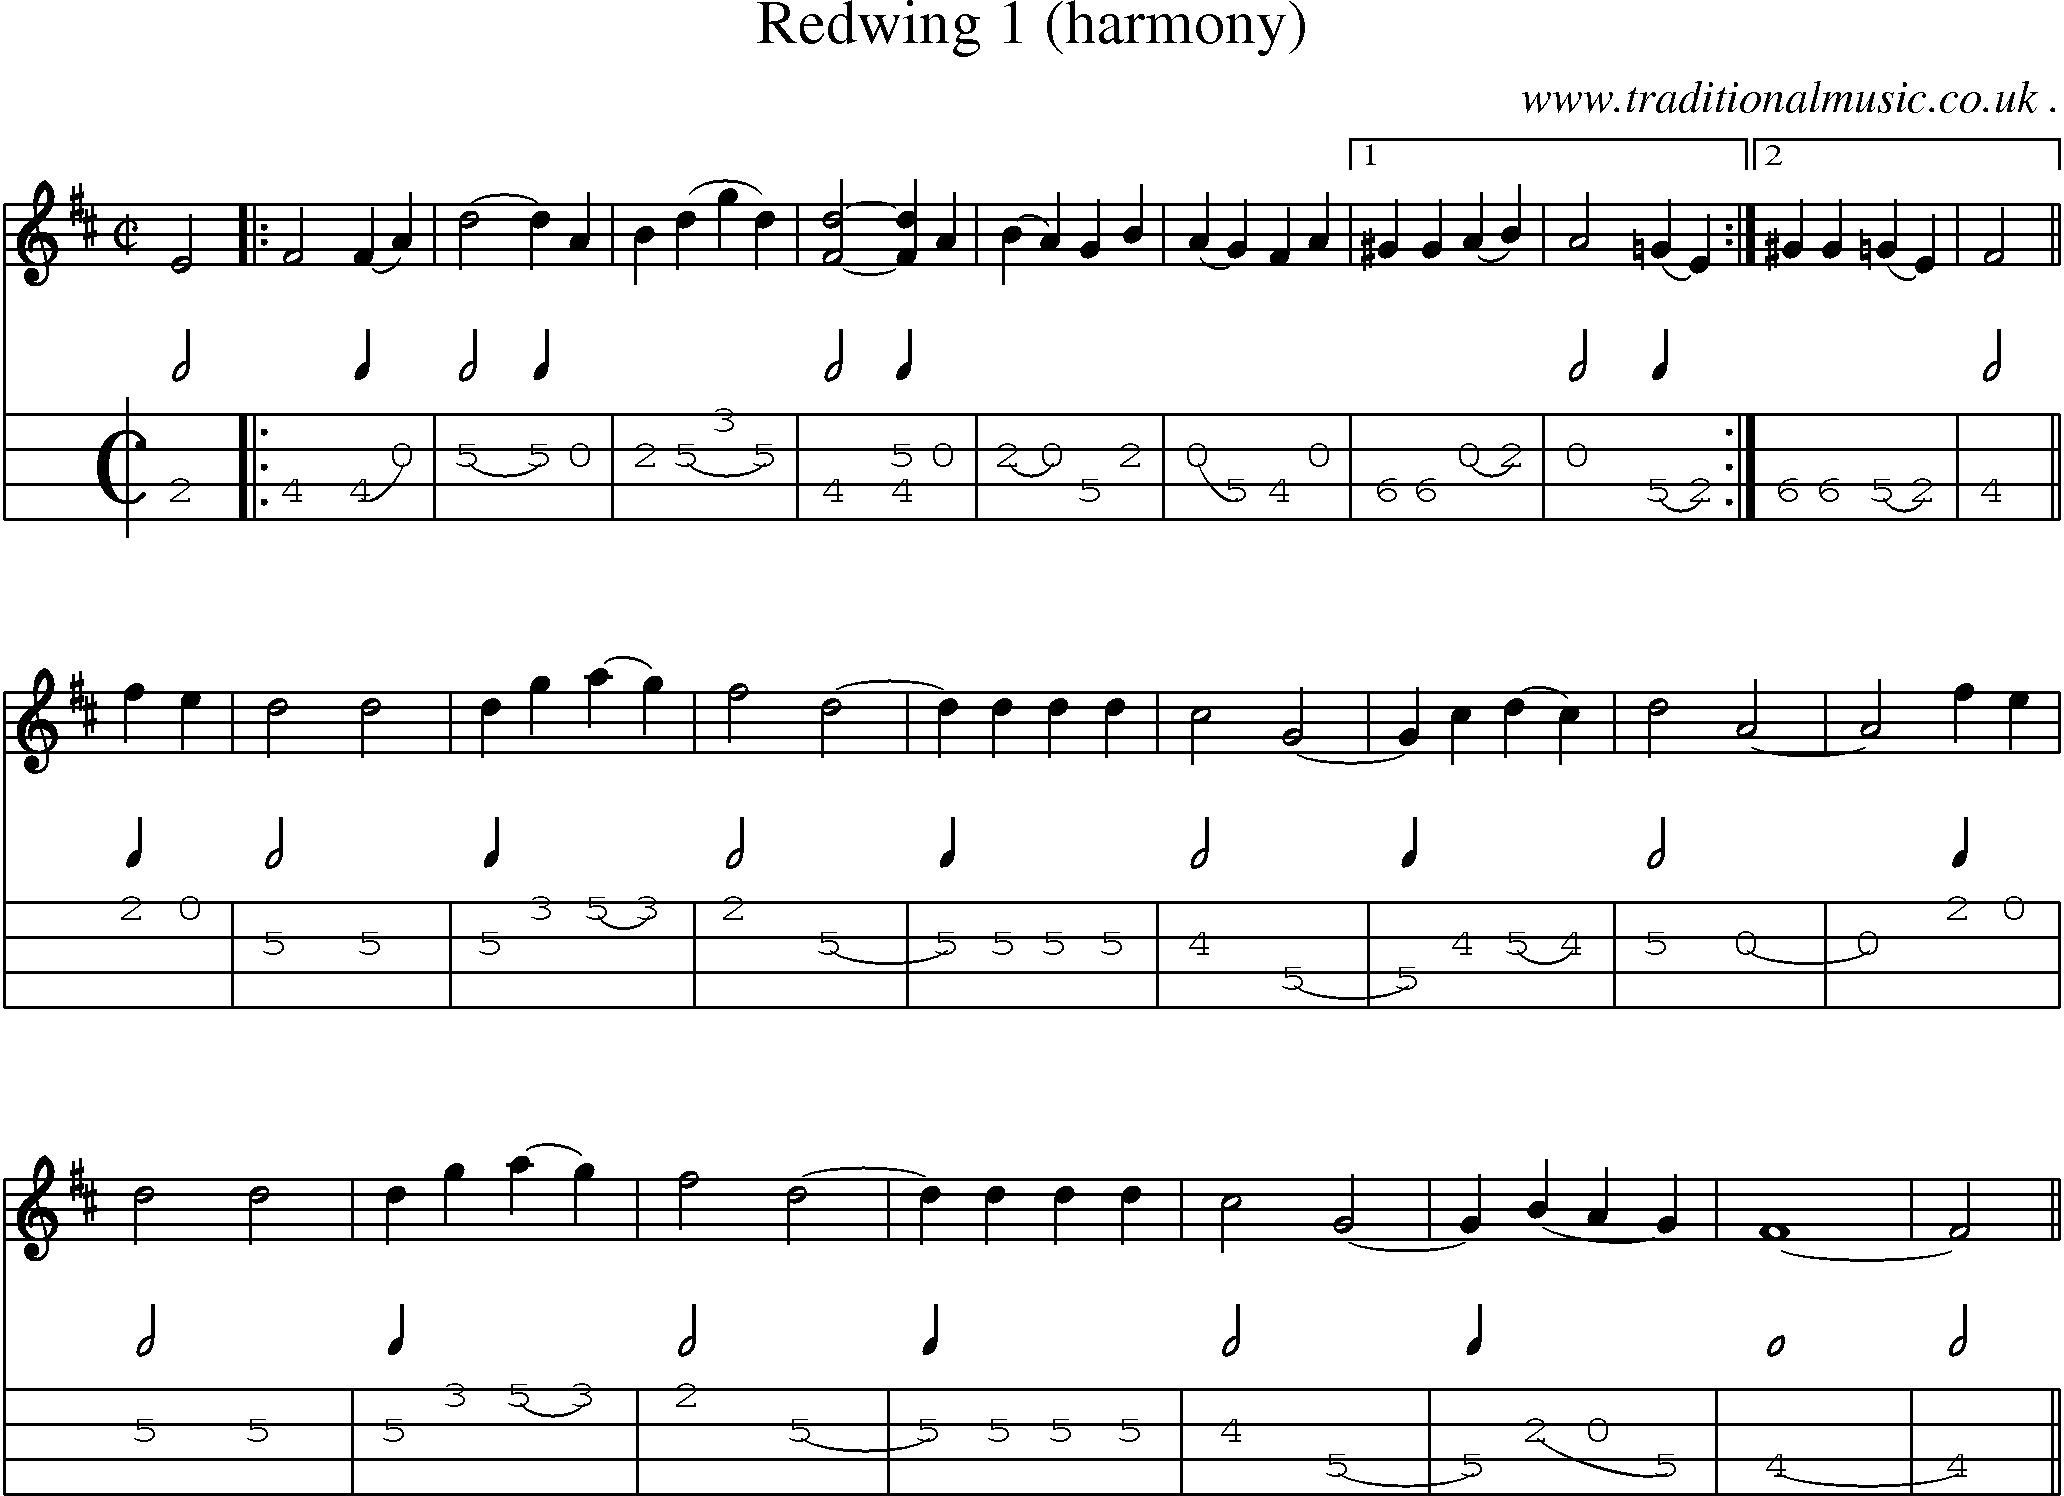 Music Score and Mandolin Tabs for Redwing 1 (harmony)